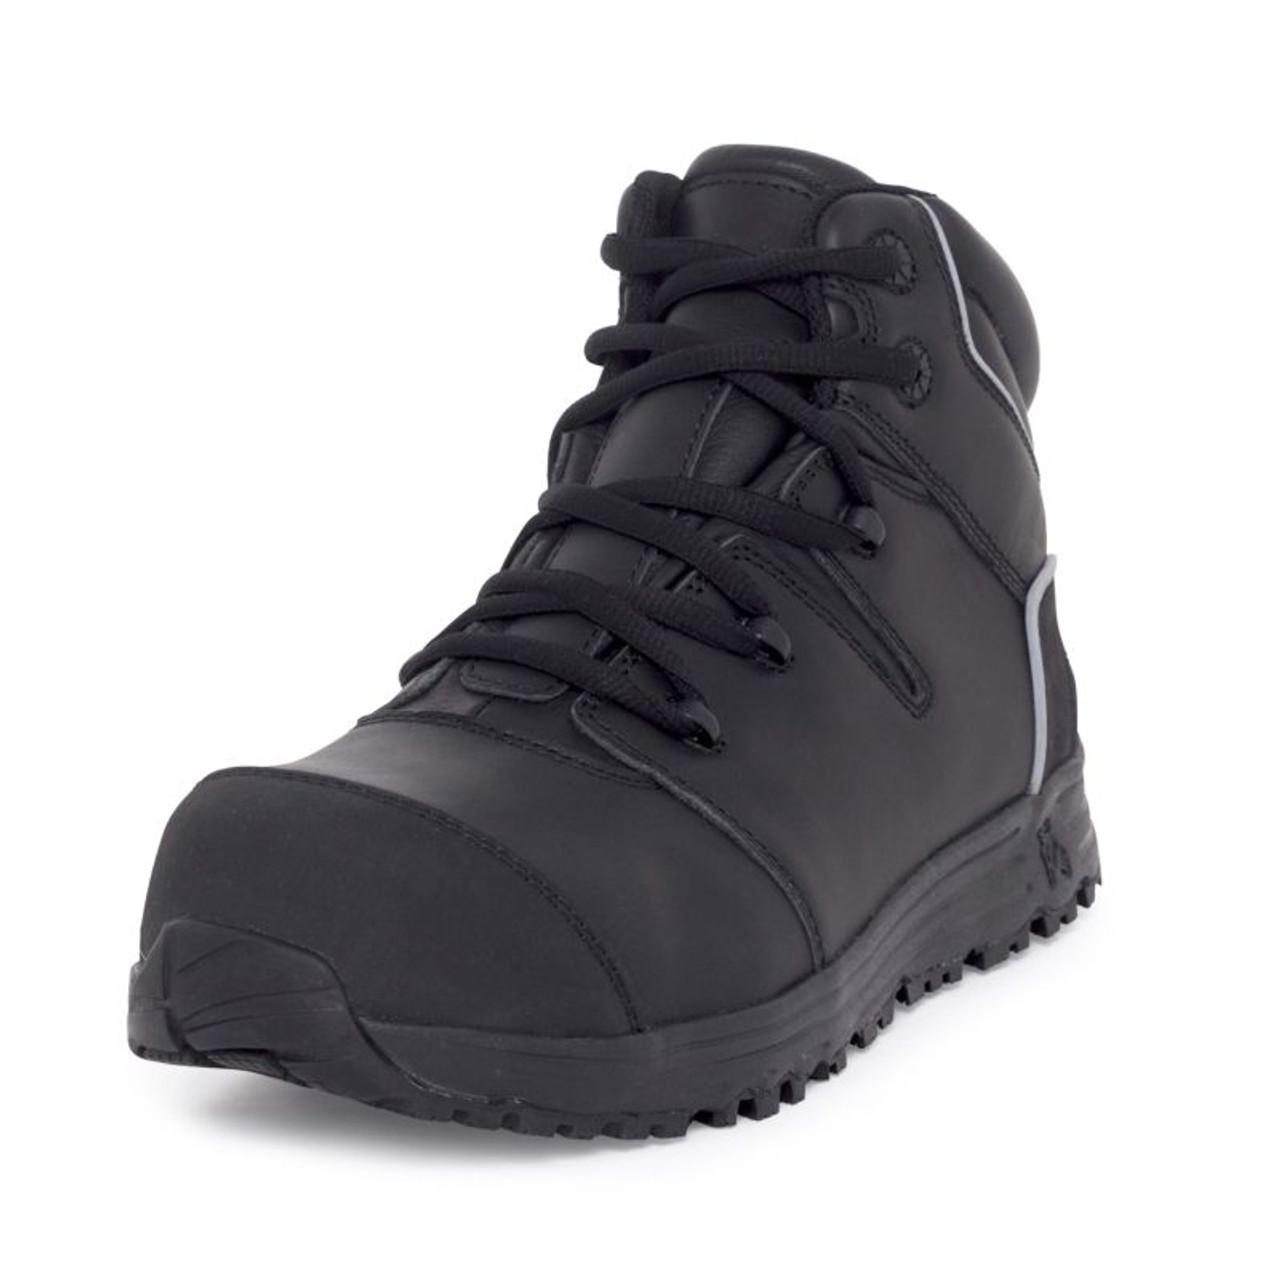 Mack Boots Haul Waterproof Slip Resistant Composite Toe Safety Boots ...